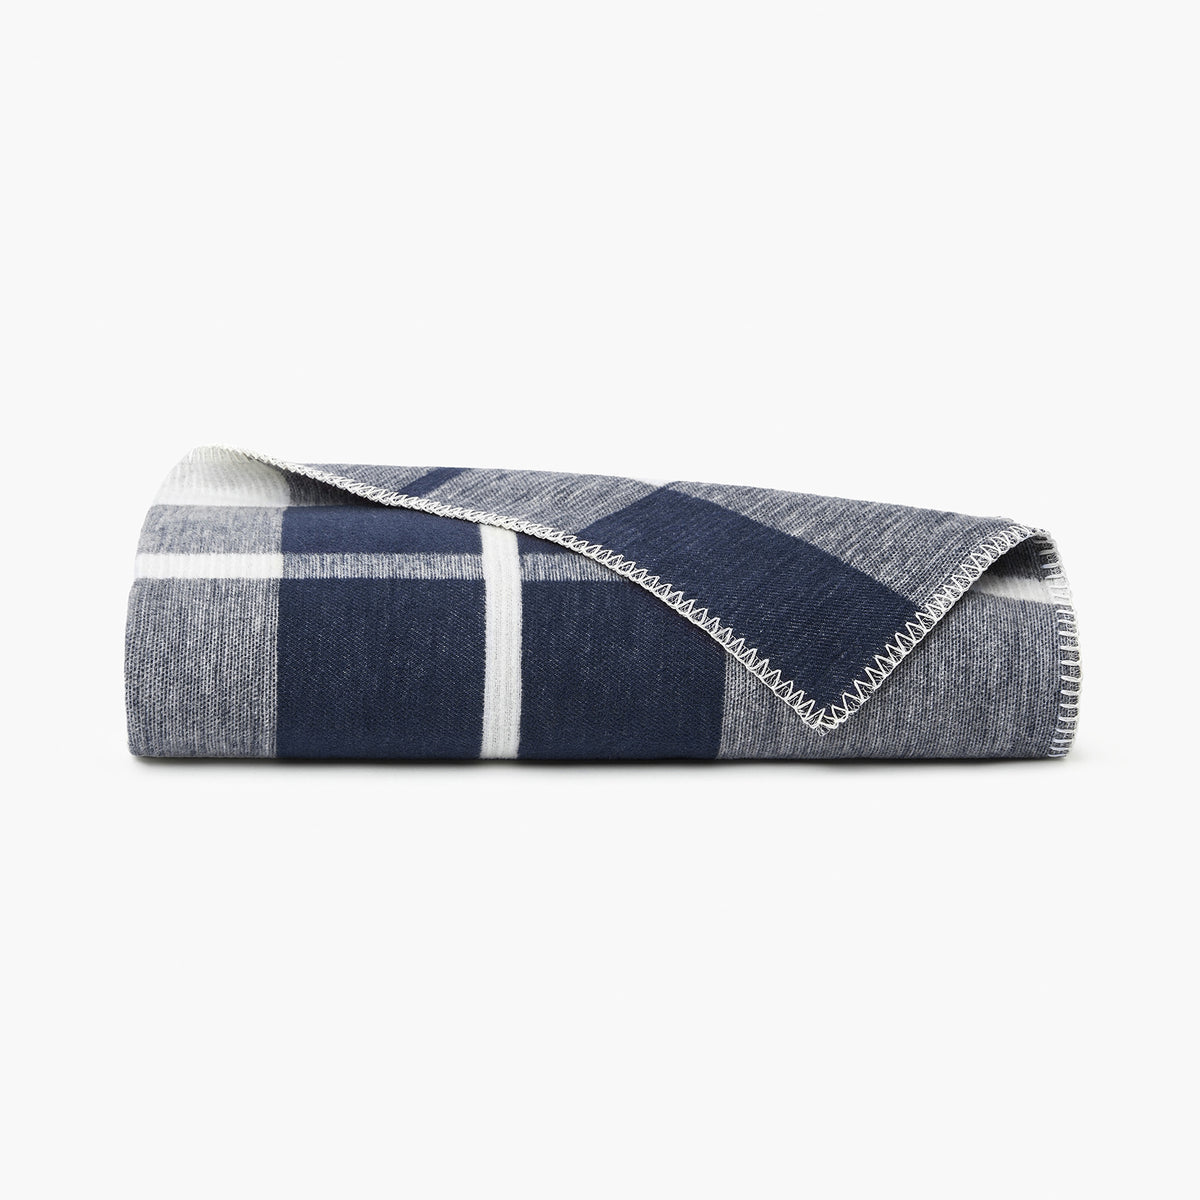 Under the Canopy Gots Certified Signature Organic Cotton Wash Cloth, Chambray Blue